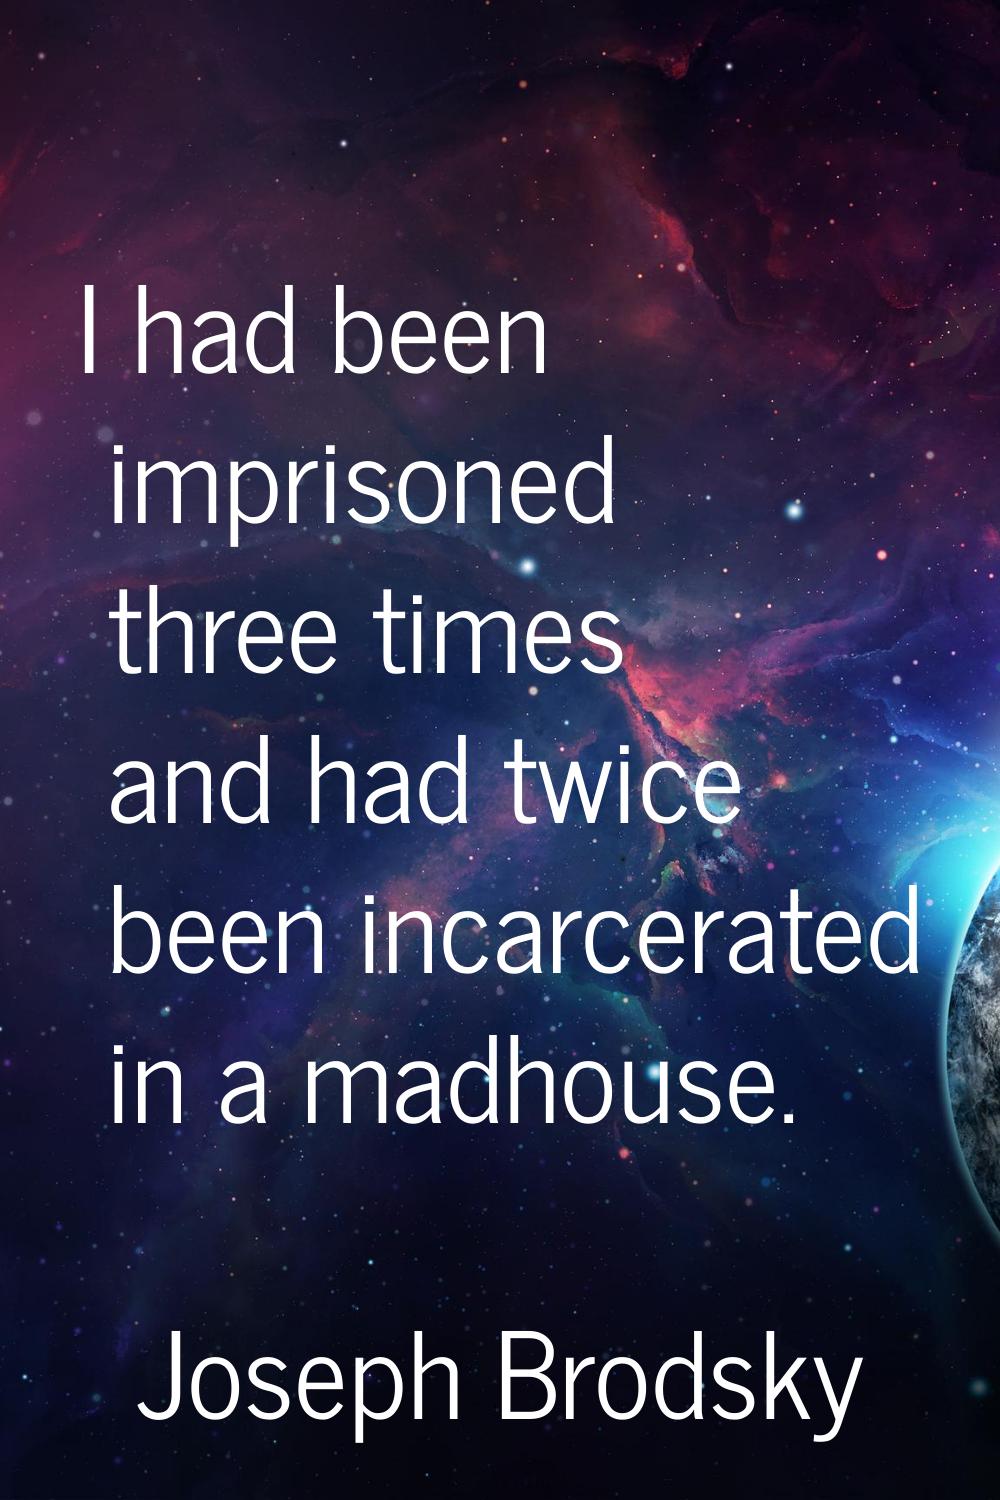 I had been imprisoned three times and had twice been incarcerated in a madhouse.